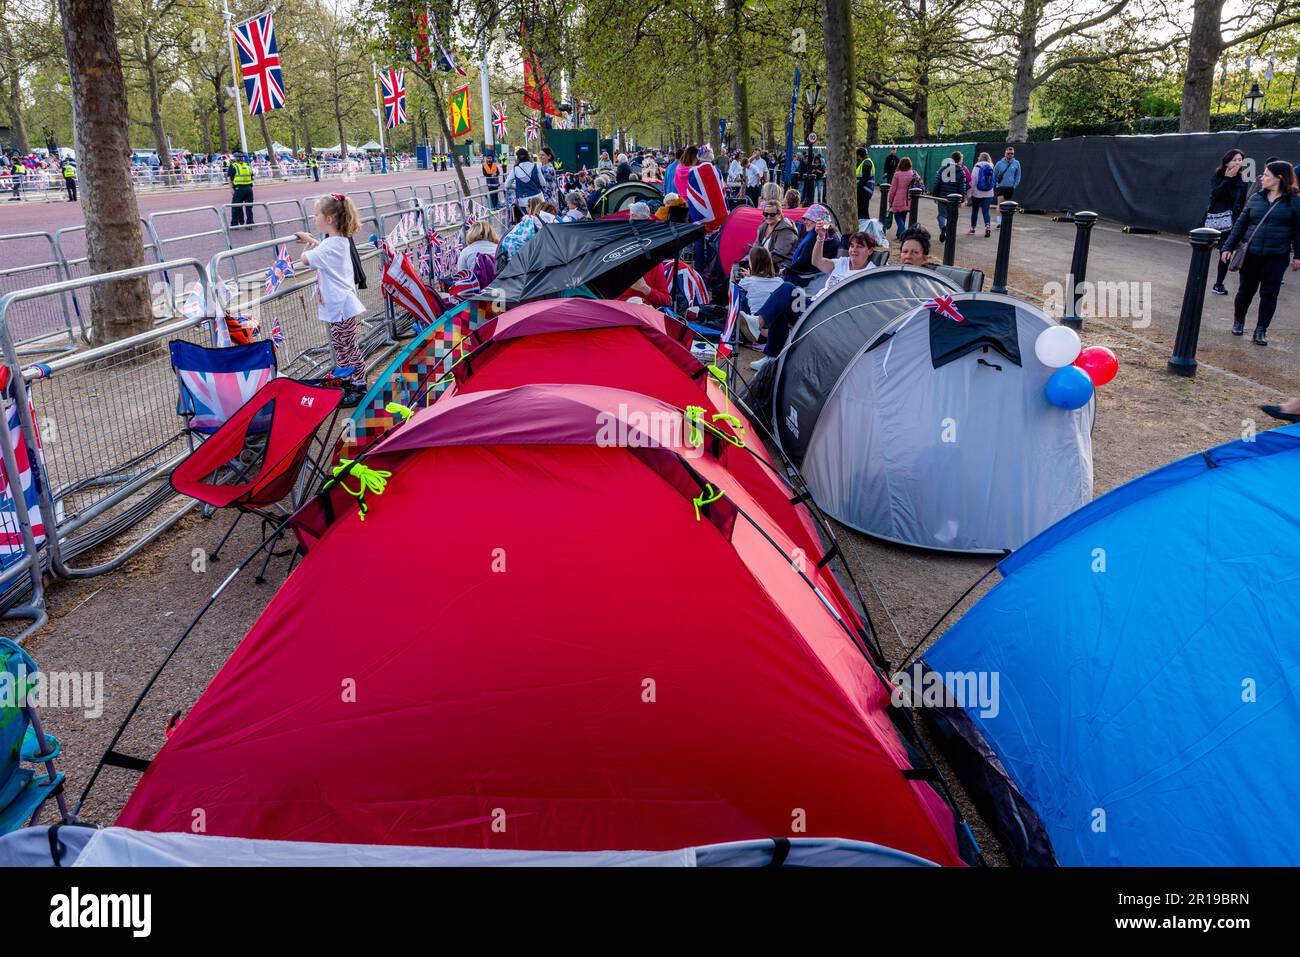 People Camp Out On The Mall To Watch The King's Procession The Day Before The Coronation of King Charles III, London, UK. Stock Photo